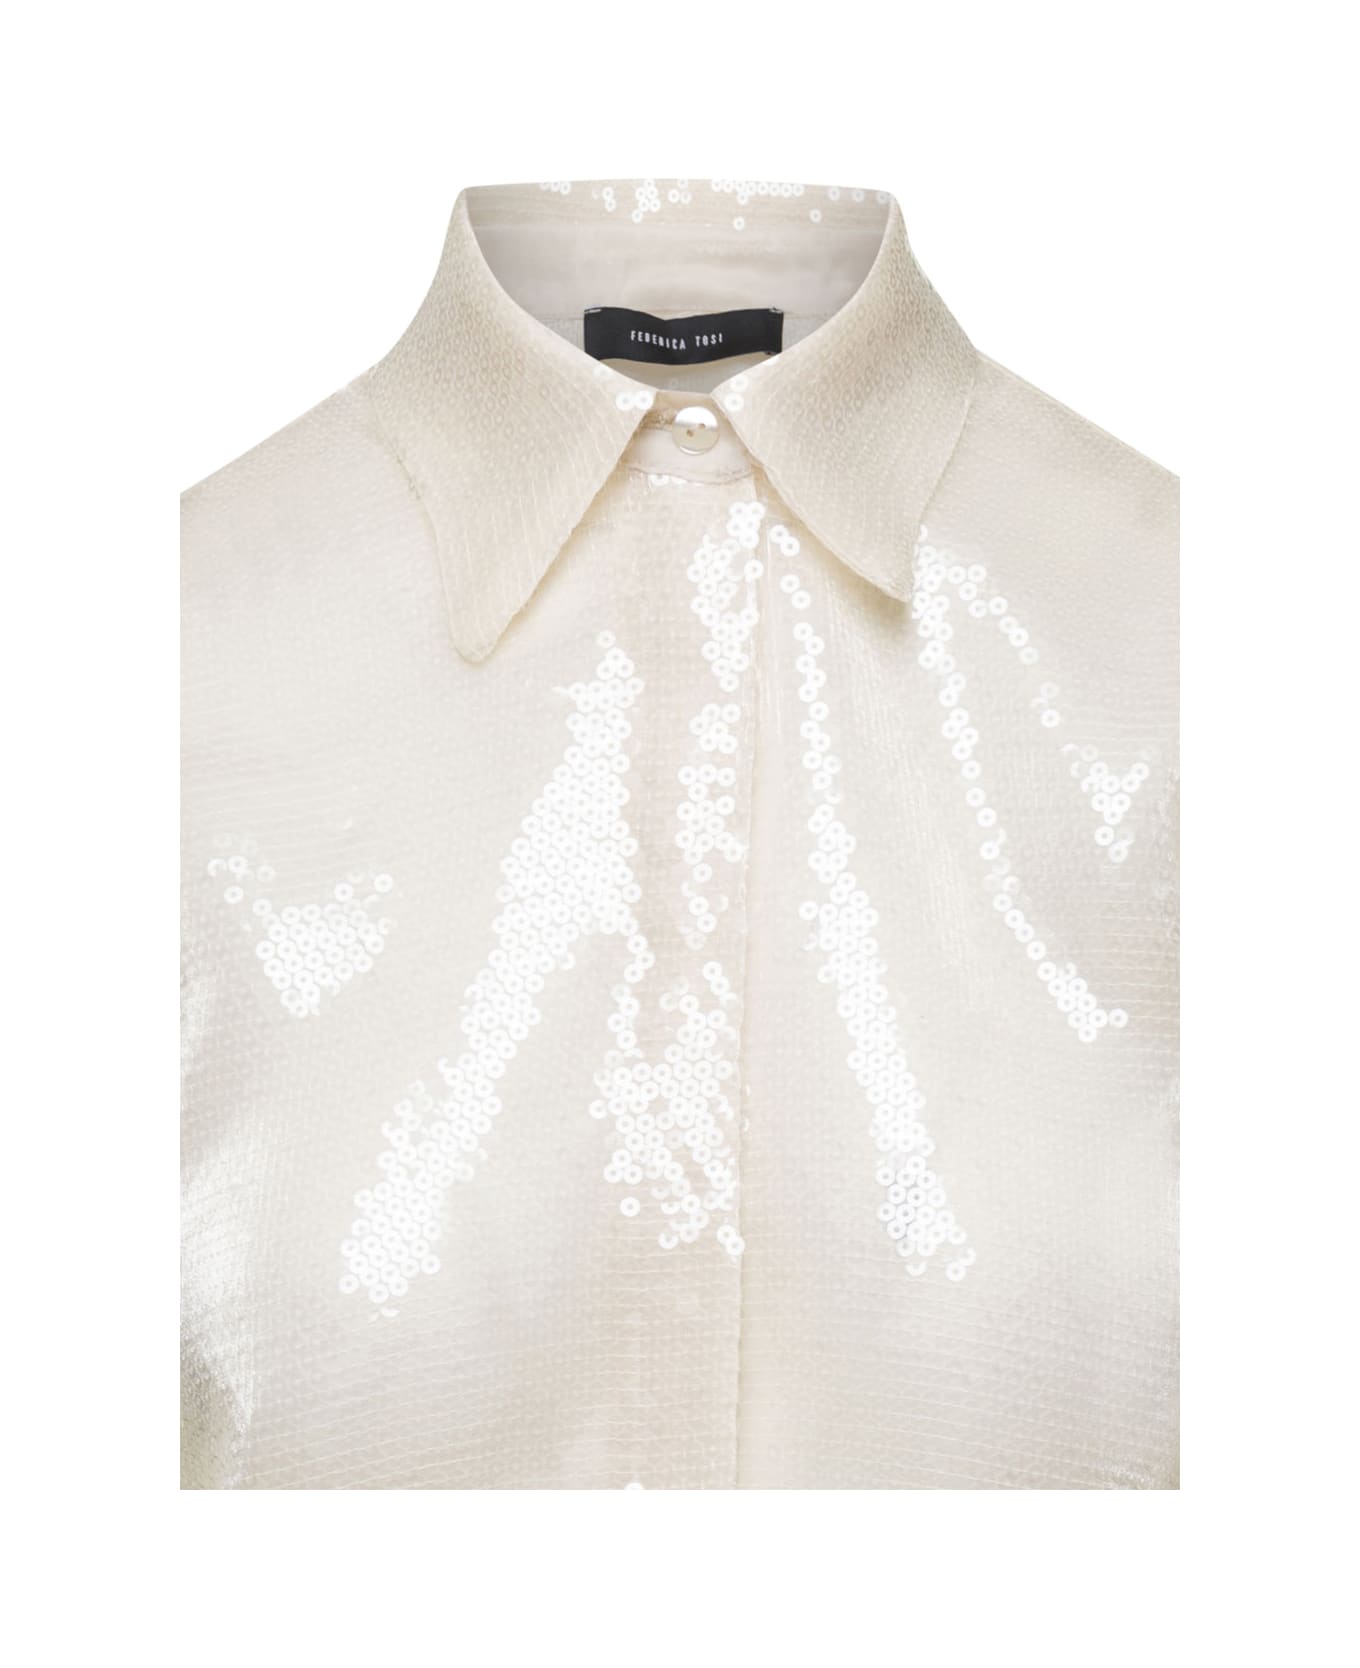 Federica Tosi Cream Shirt With Sequins All Over In Techno Fabric Woman - White シャツ